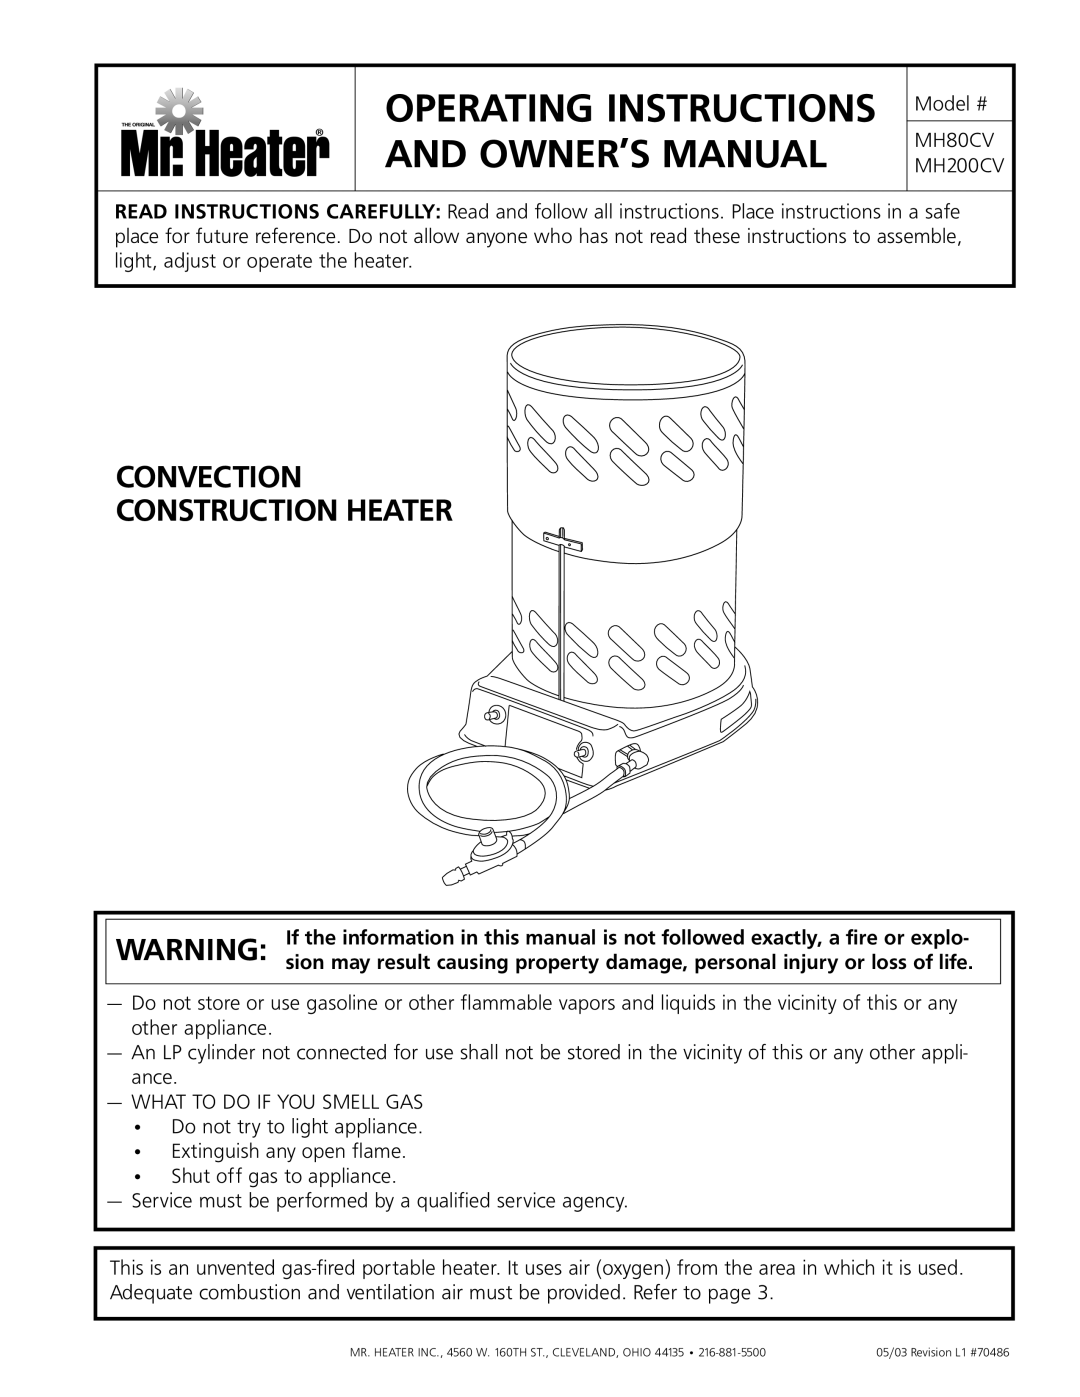 Enerco MH200CV, MH80CV operating instructions Convection Construction Heater 